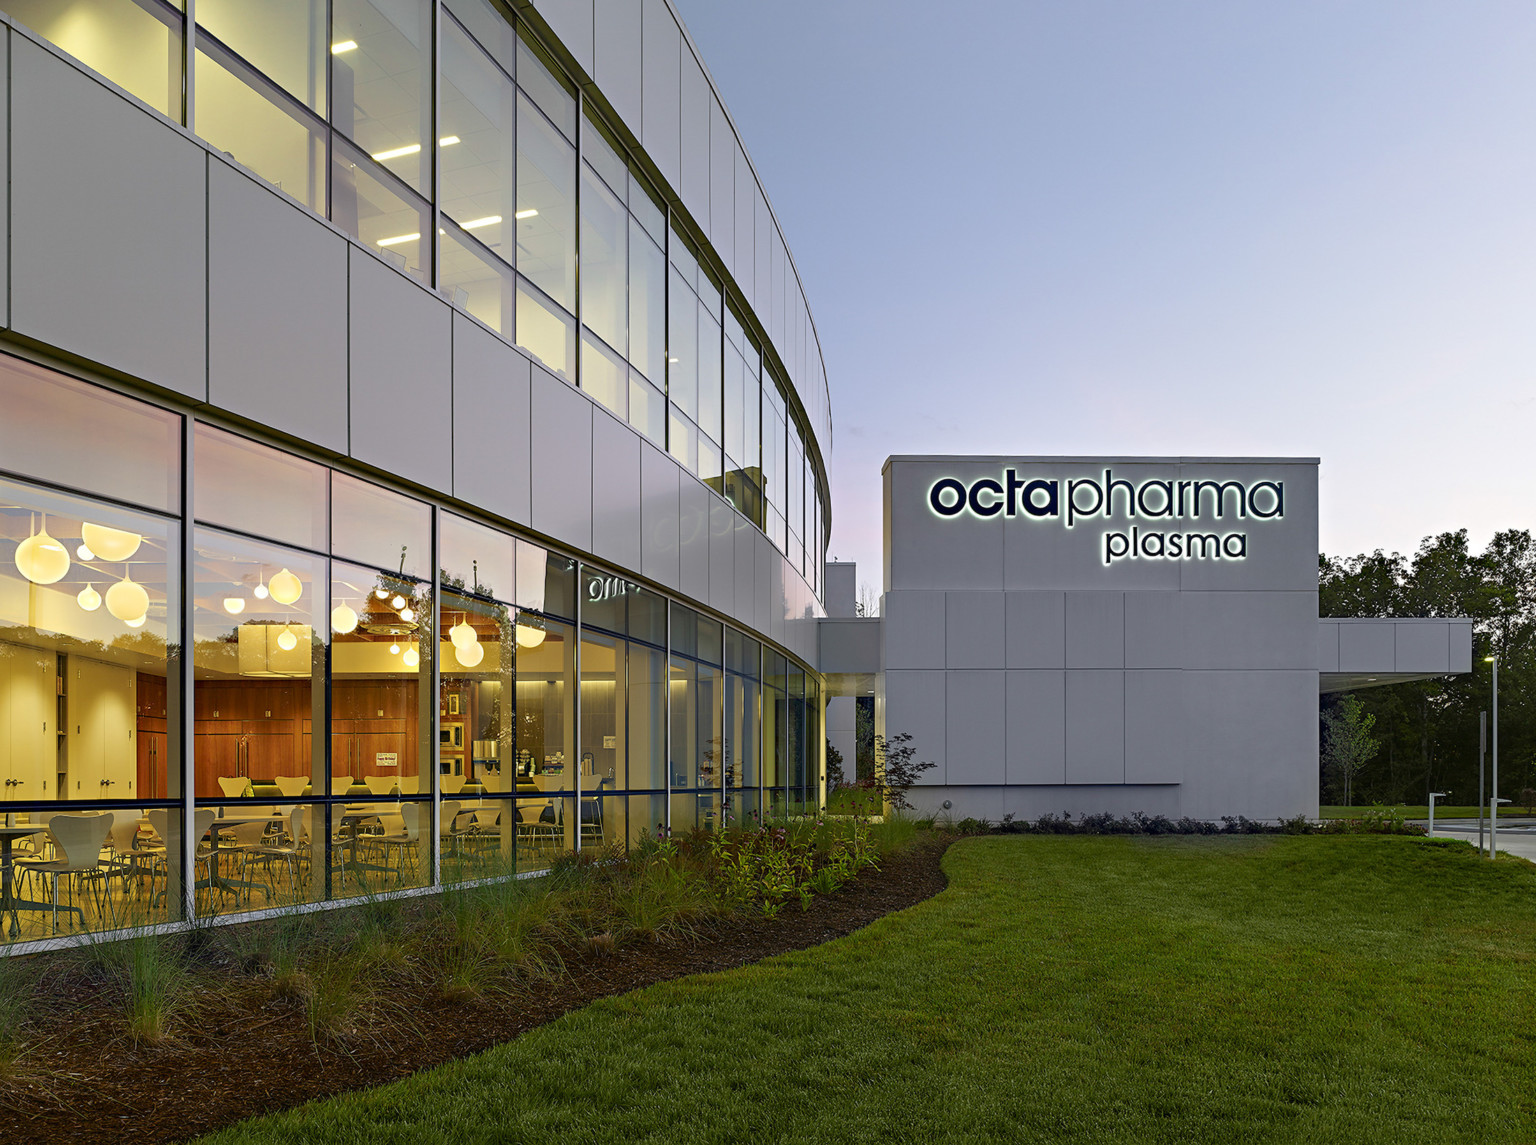 evening view of a double height glass facade with Octapharma logo on the far building wall